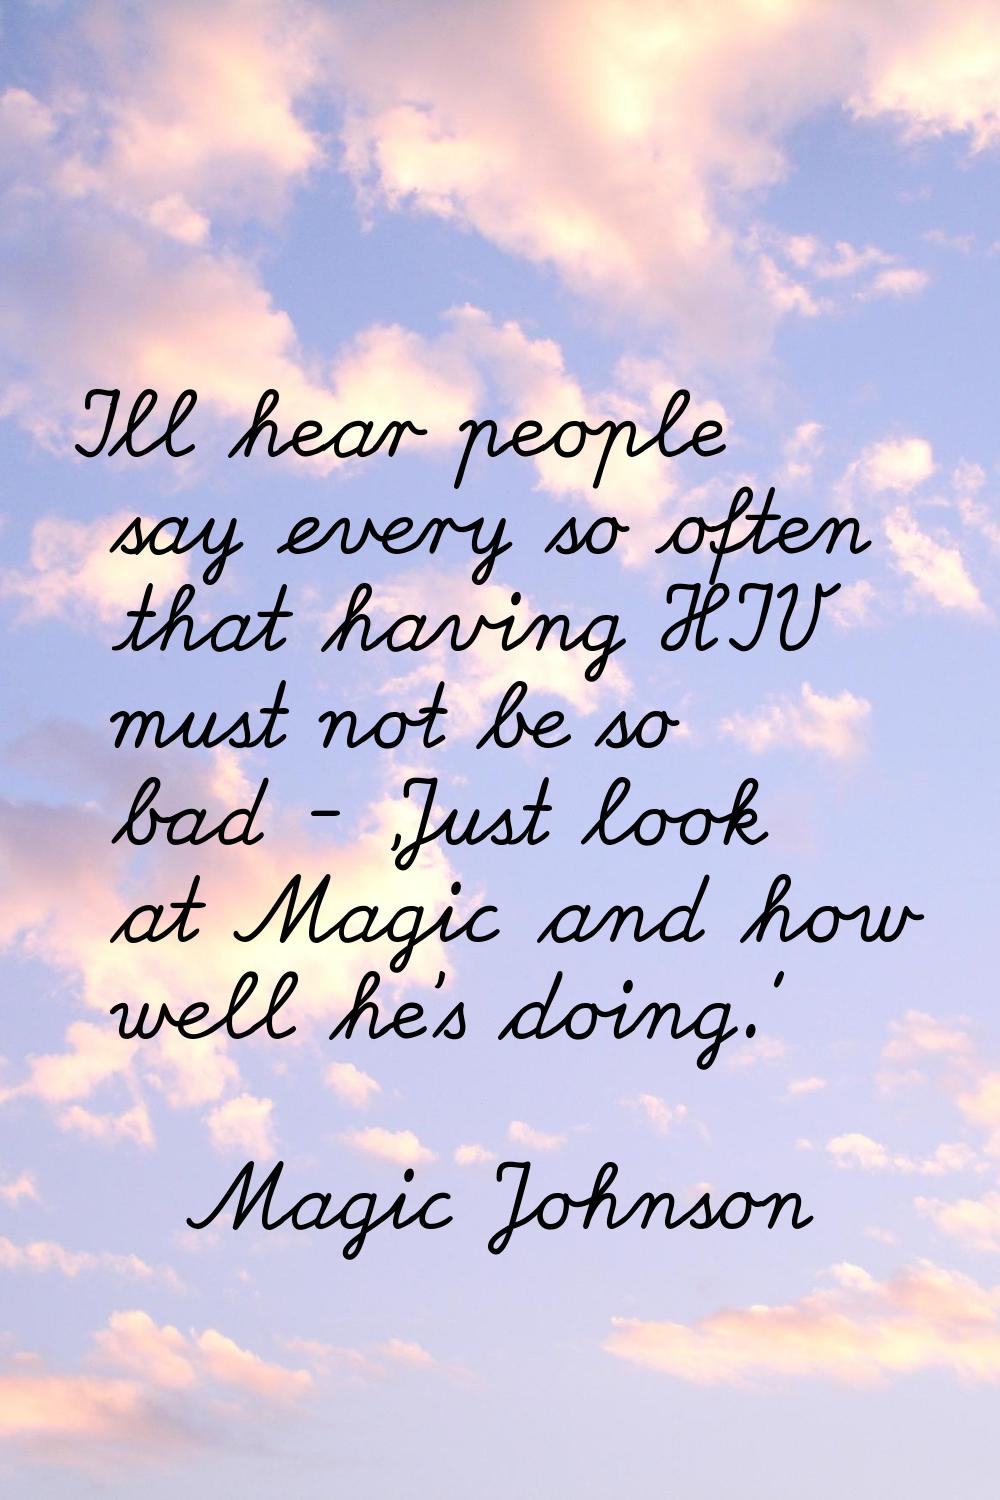 I'll hear people say every so often that having HIV must not be so bad - 'Just look at Magic and ho